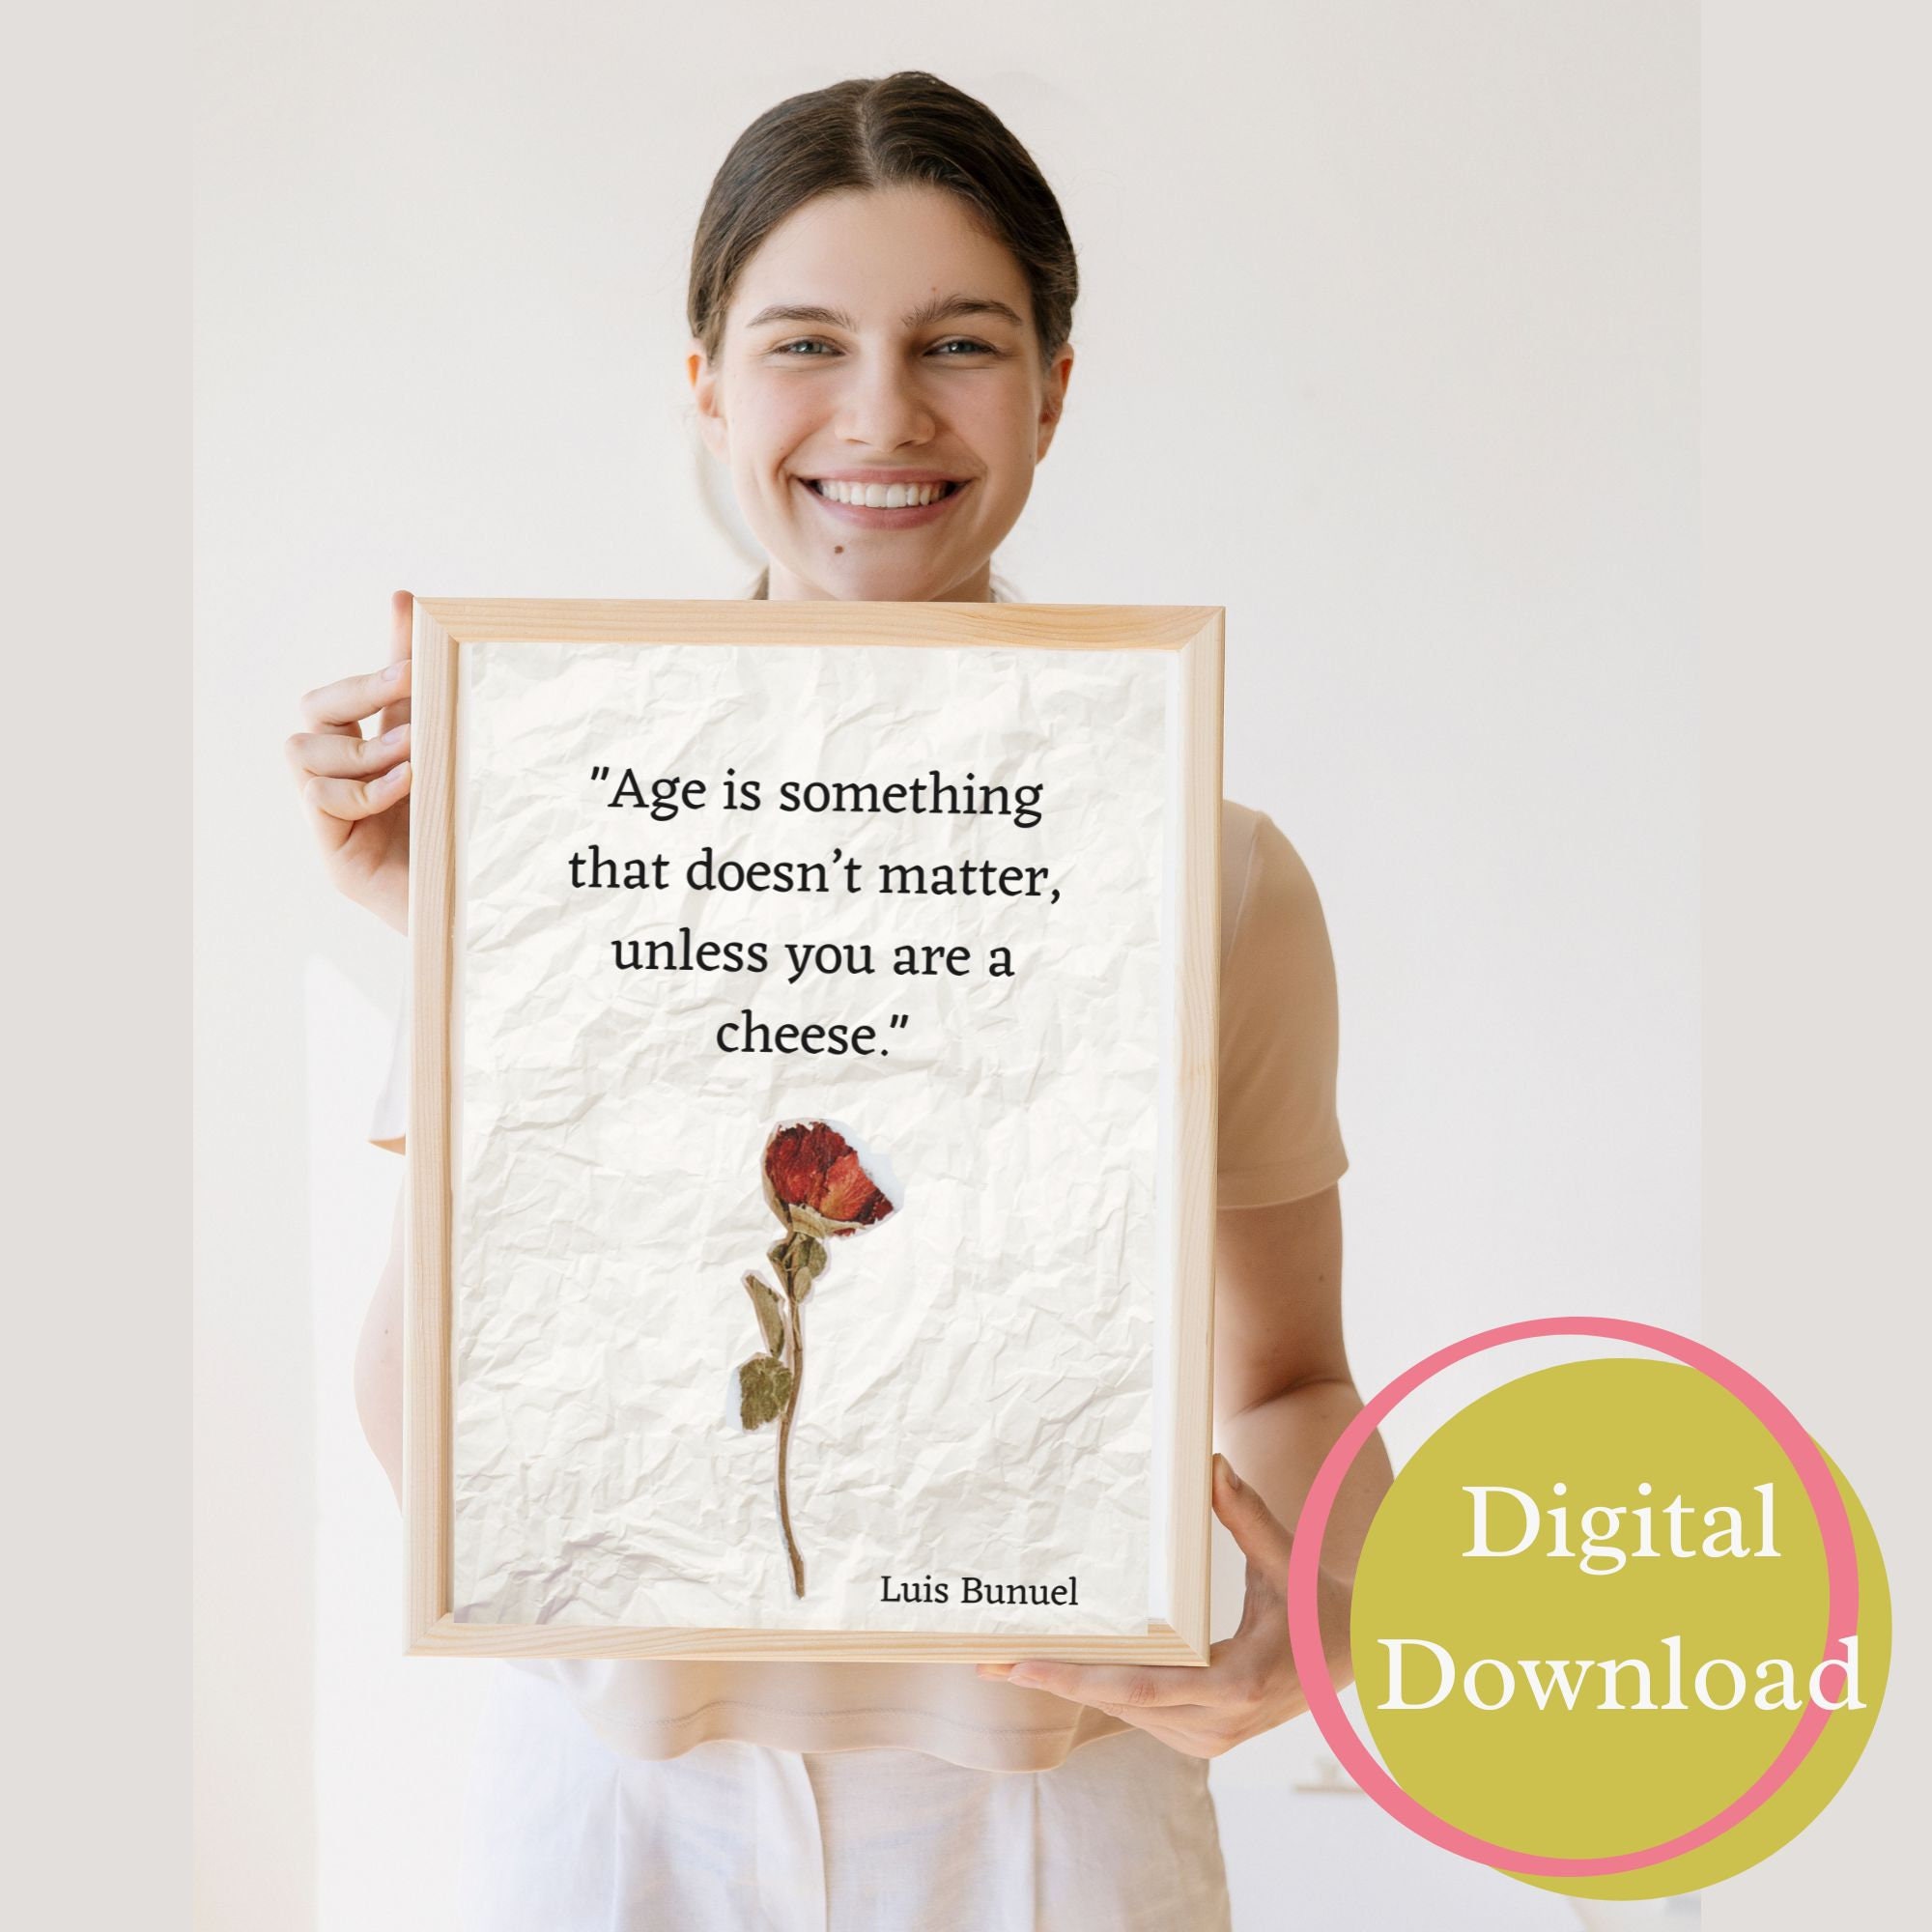 Quotes About Life, Age is Something That Doesn't Matter, Printable